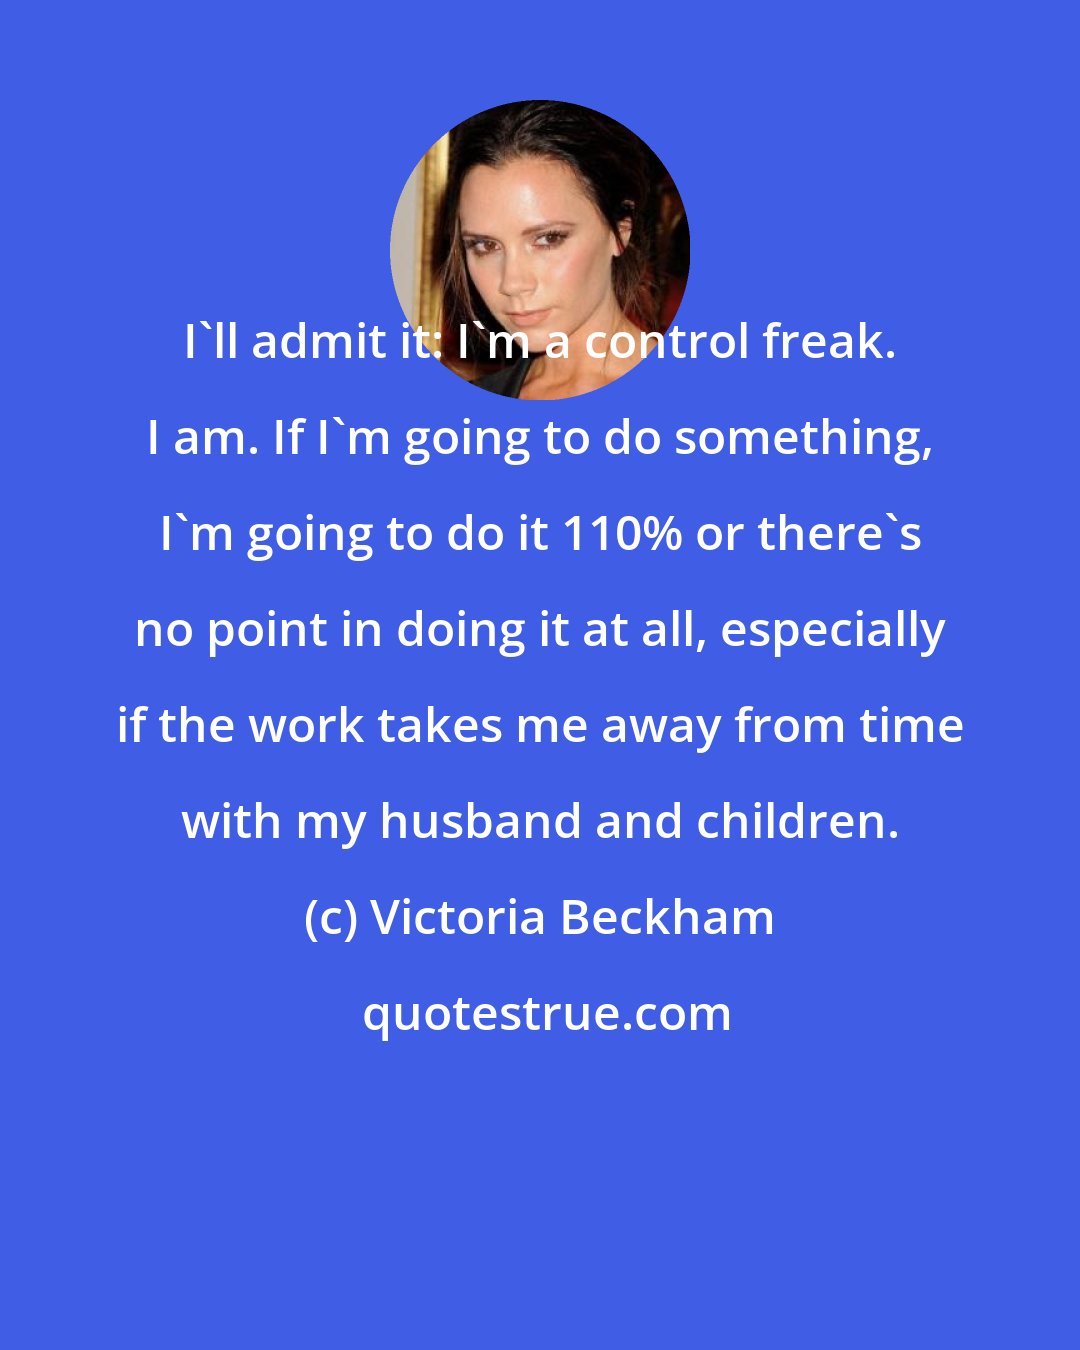 Victoria Beckham: I'll admit it: I'm a control freak. I am. If I'm going to do something, I'm going to do it 110% or there's no point in doing it at all, especially if the work takes me away from time with my husband and children.